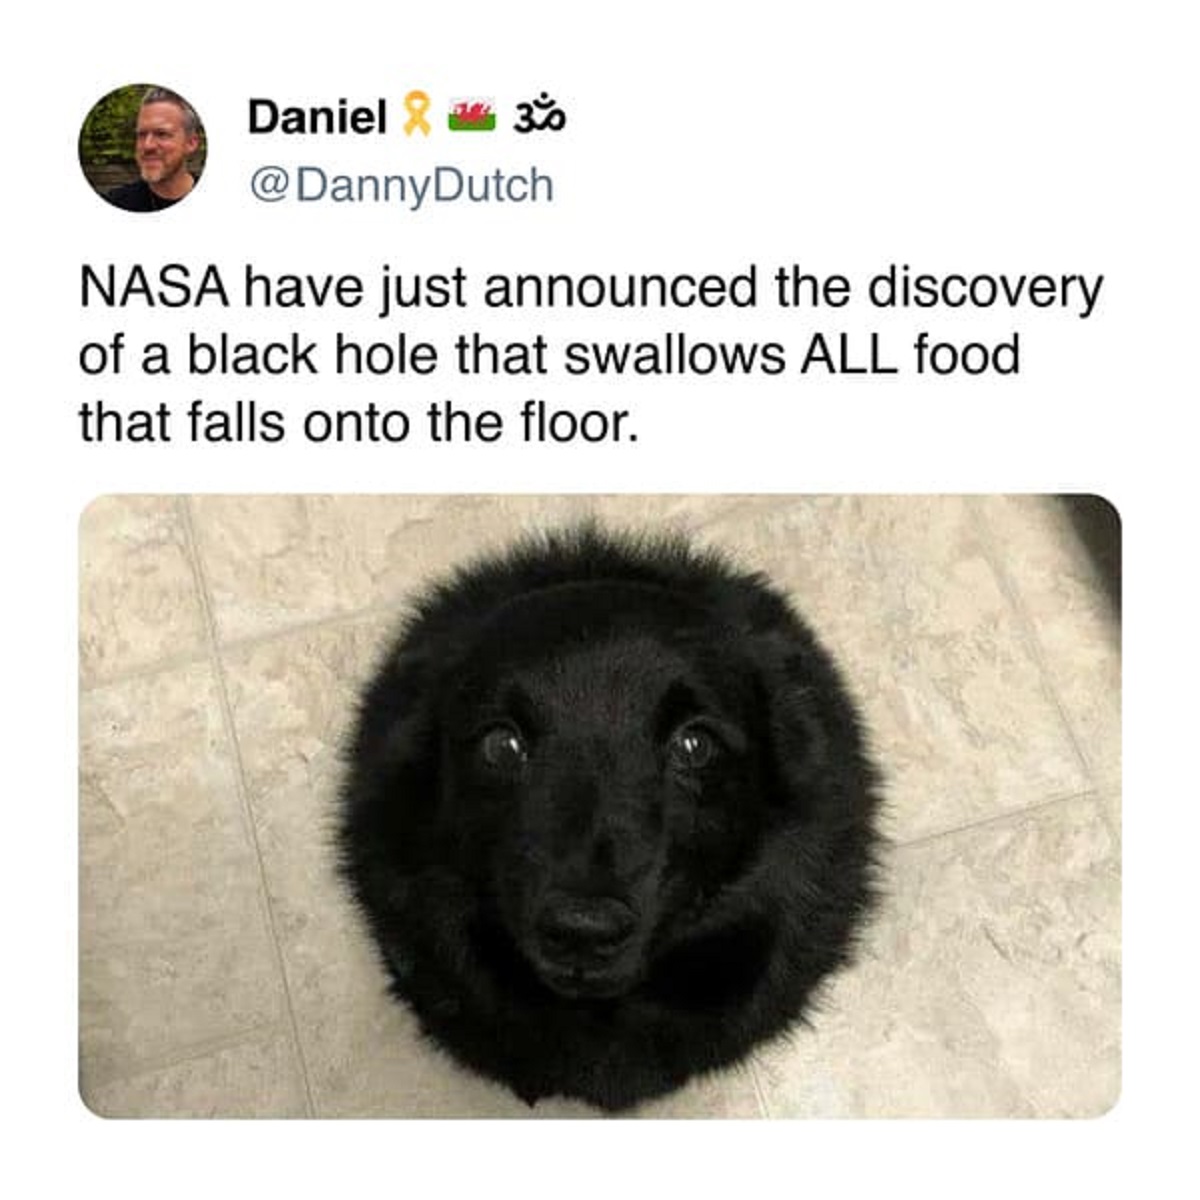 fisher - Daniel 30% Nasa have just announced the discovery of a black hole that swallows All food that falls onto the floor.